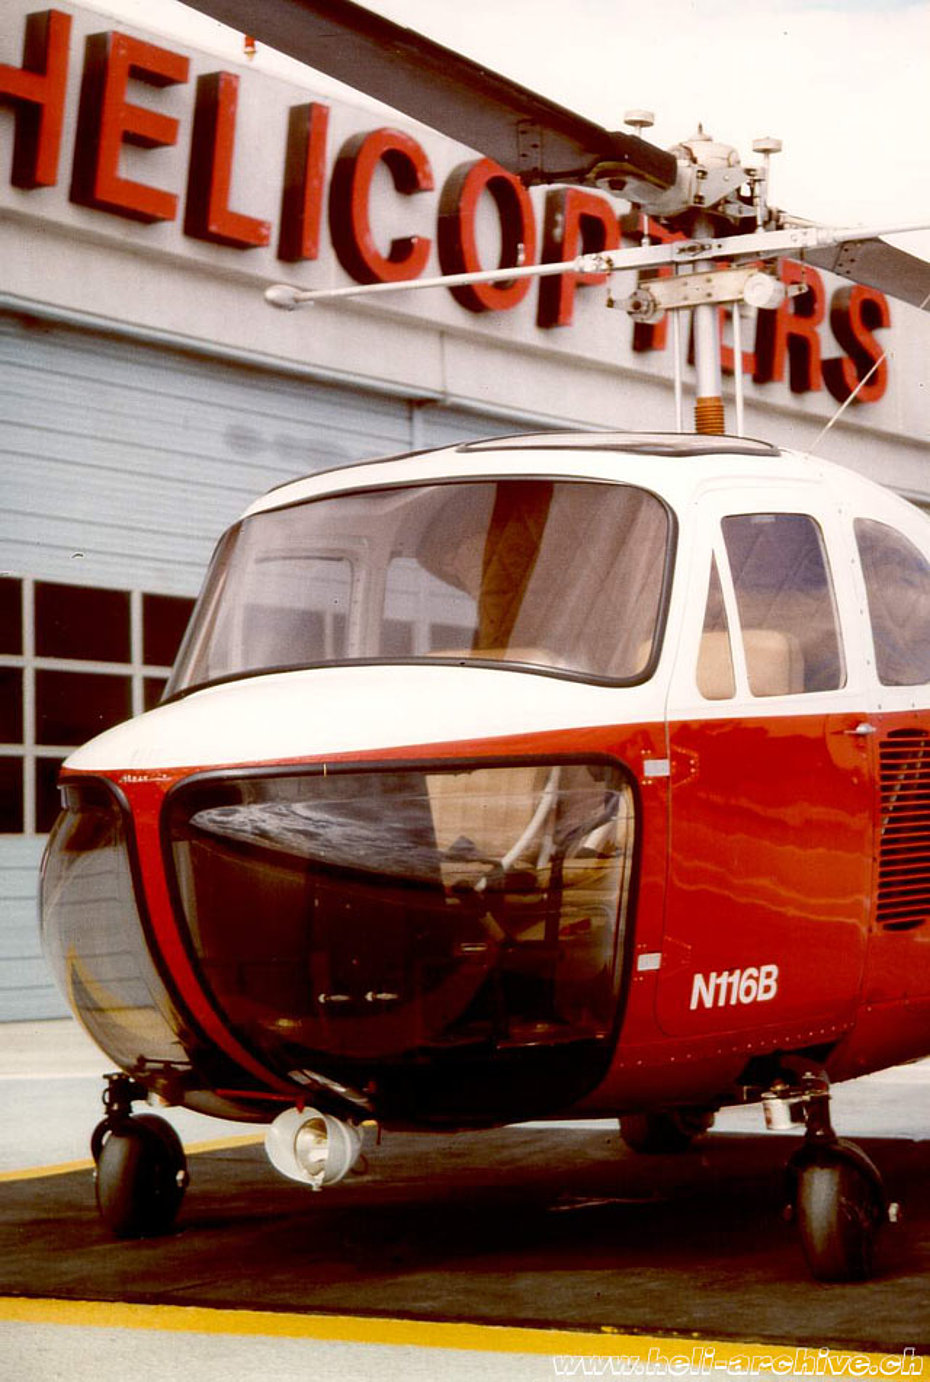 The Bell 47B features car-like windscreen and door (M. Bazzani)